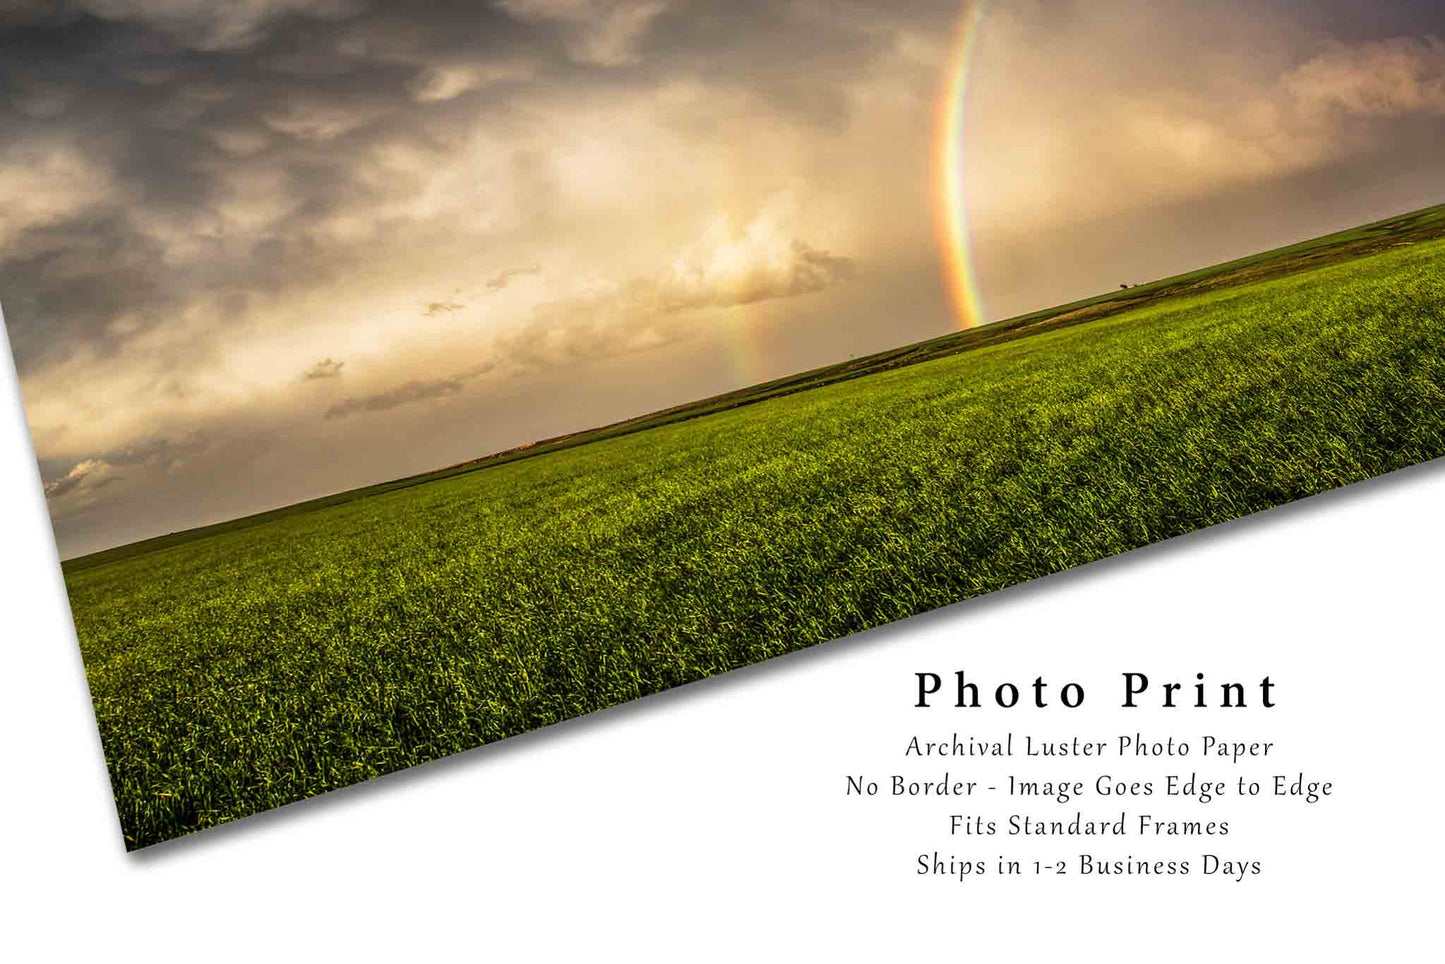 Rainbow Picture - Fine Art Weather Photography Print of Brilliant Rainbow Over Field on Stormy Day in Oklahoma Country Wall Art Photo Decor